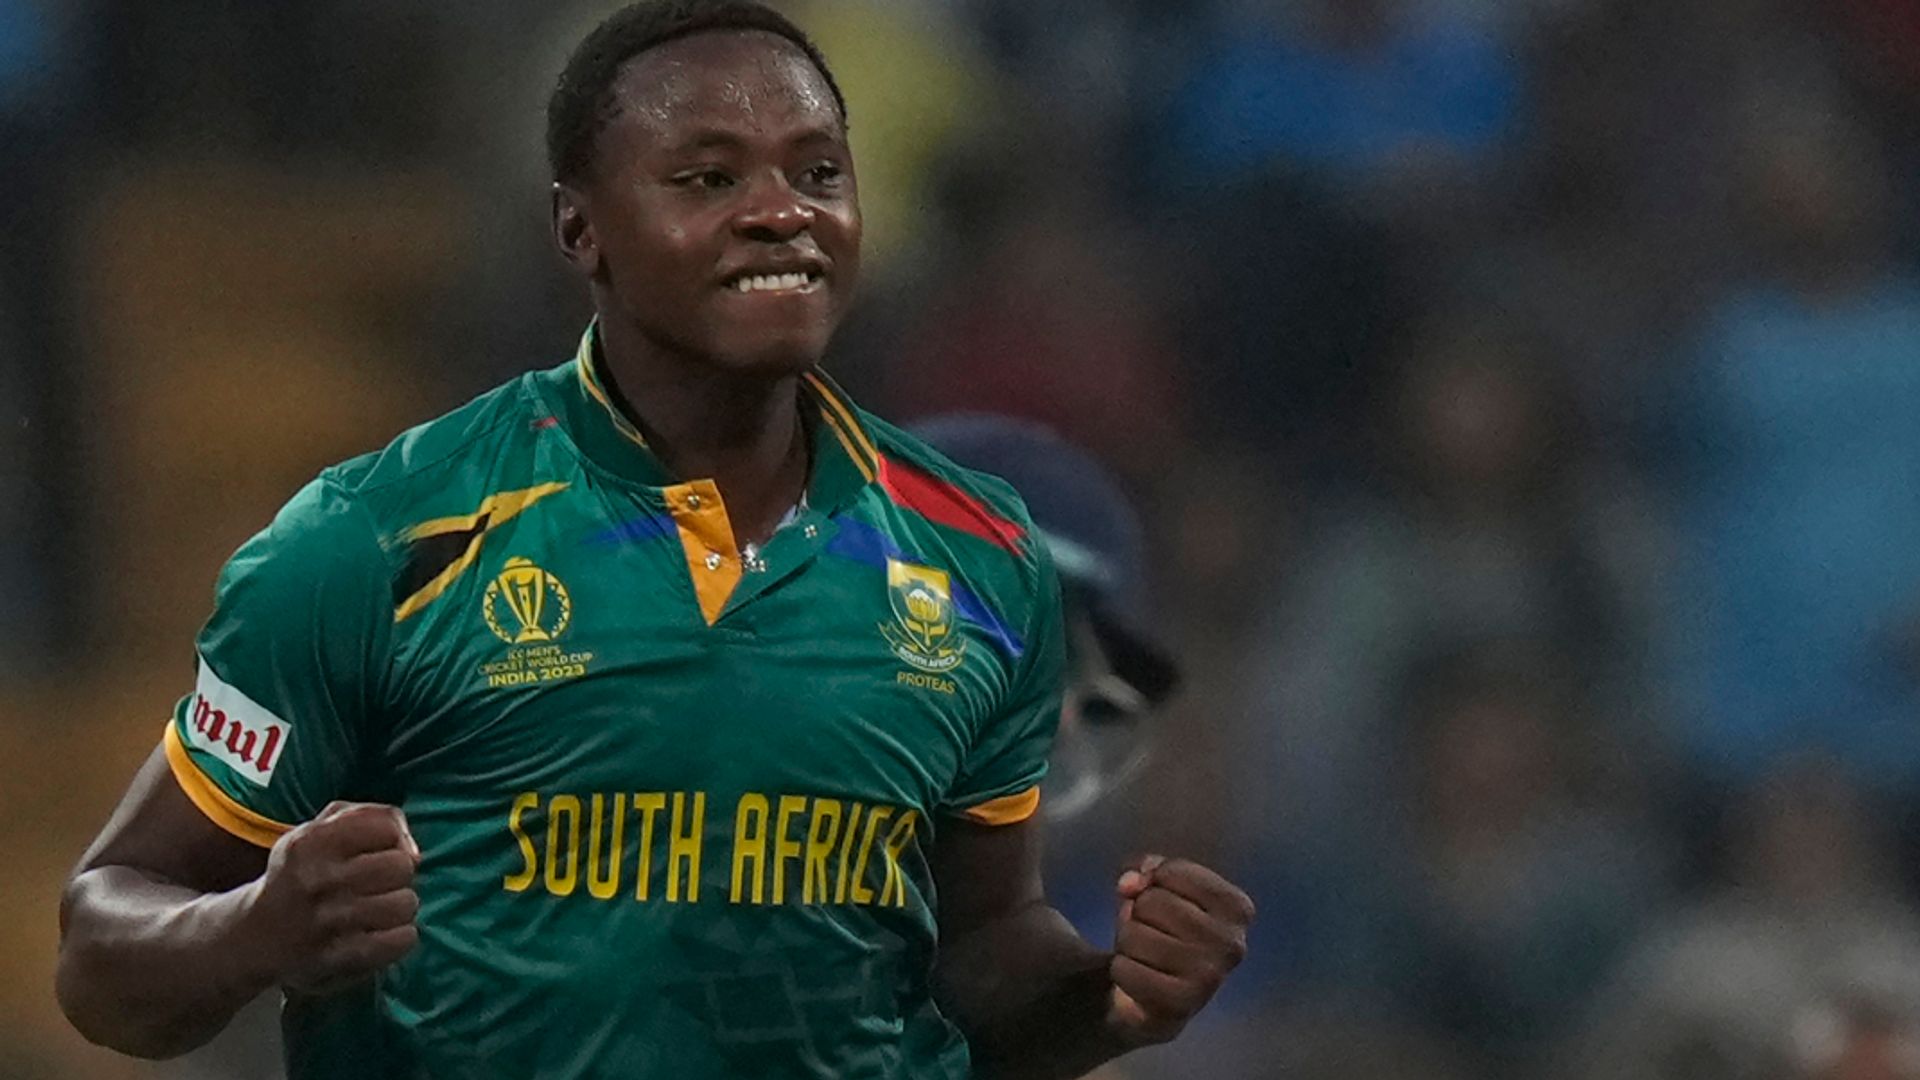 South Africa demolish England by 229 runs - as it happened